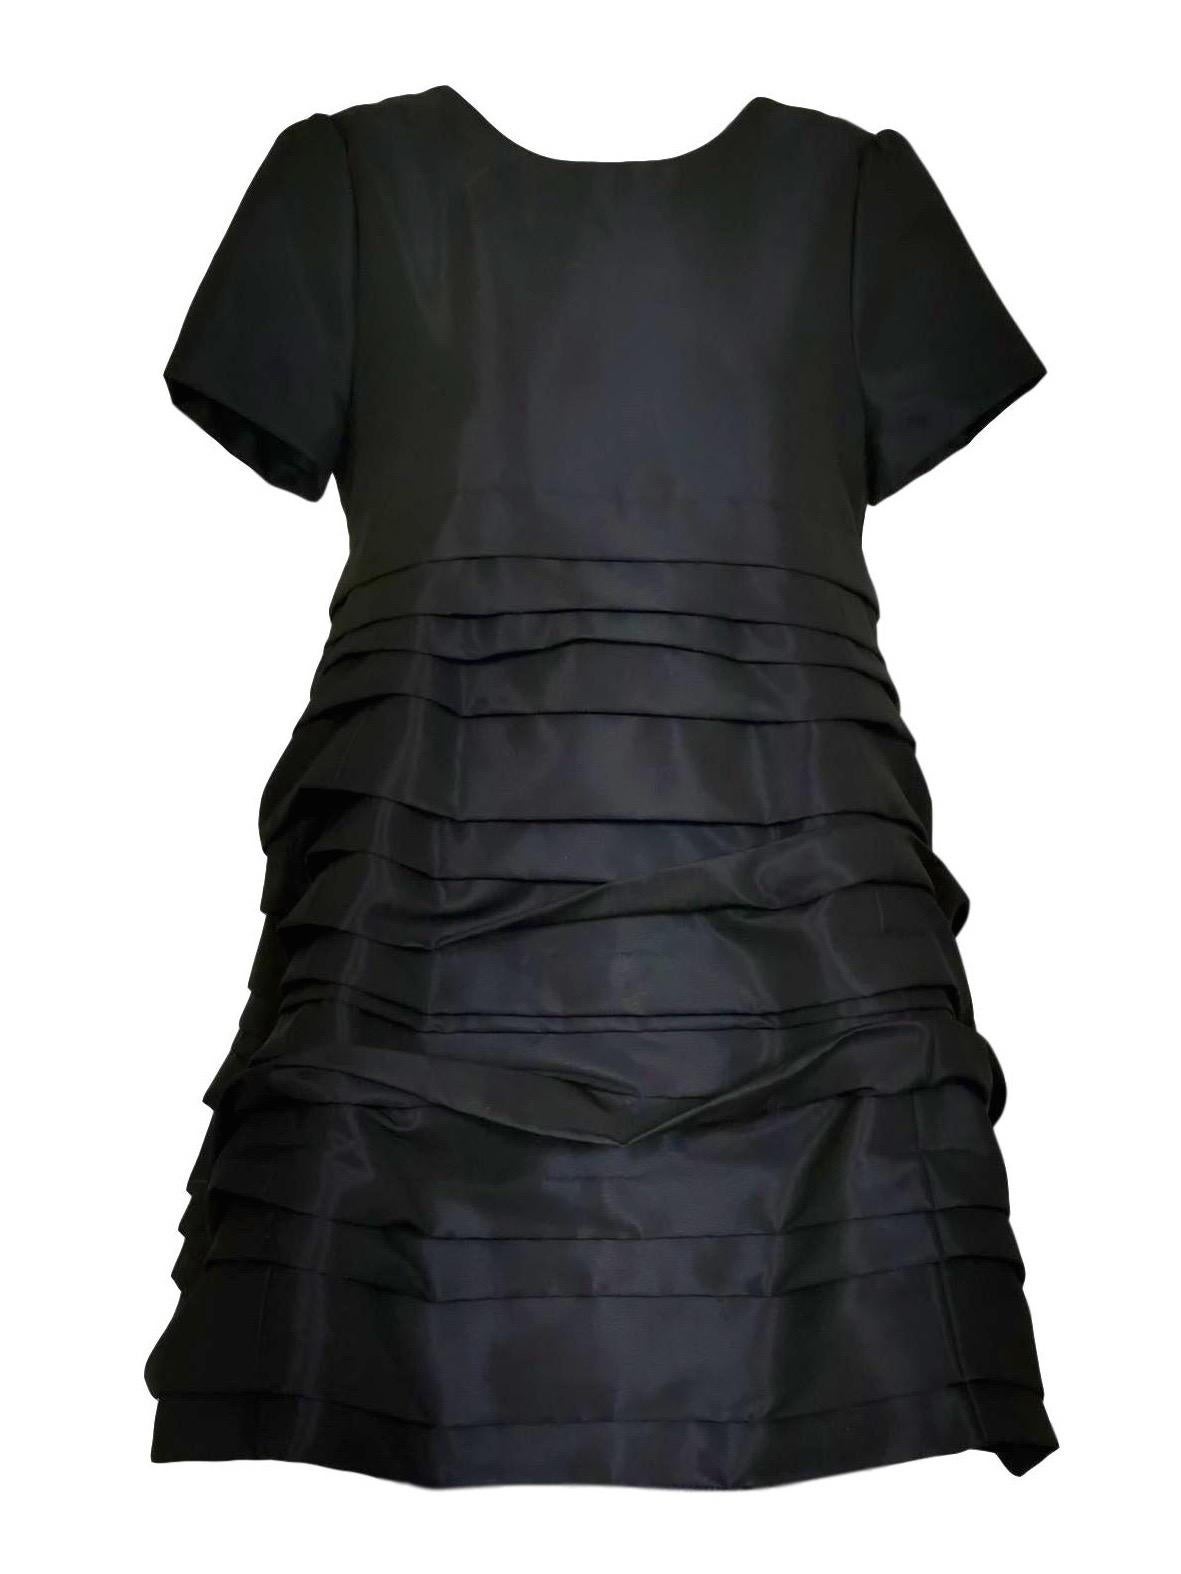 Comme des Garcons Horizontal Pleated Dress with Back Flap 1994 For Sale 7